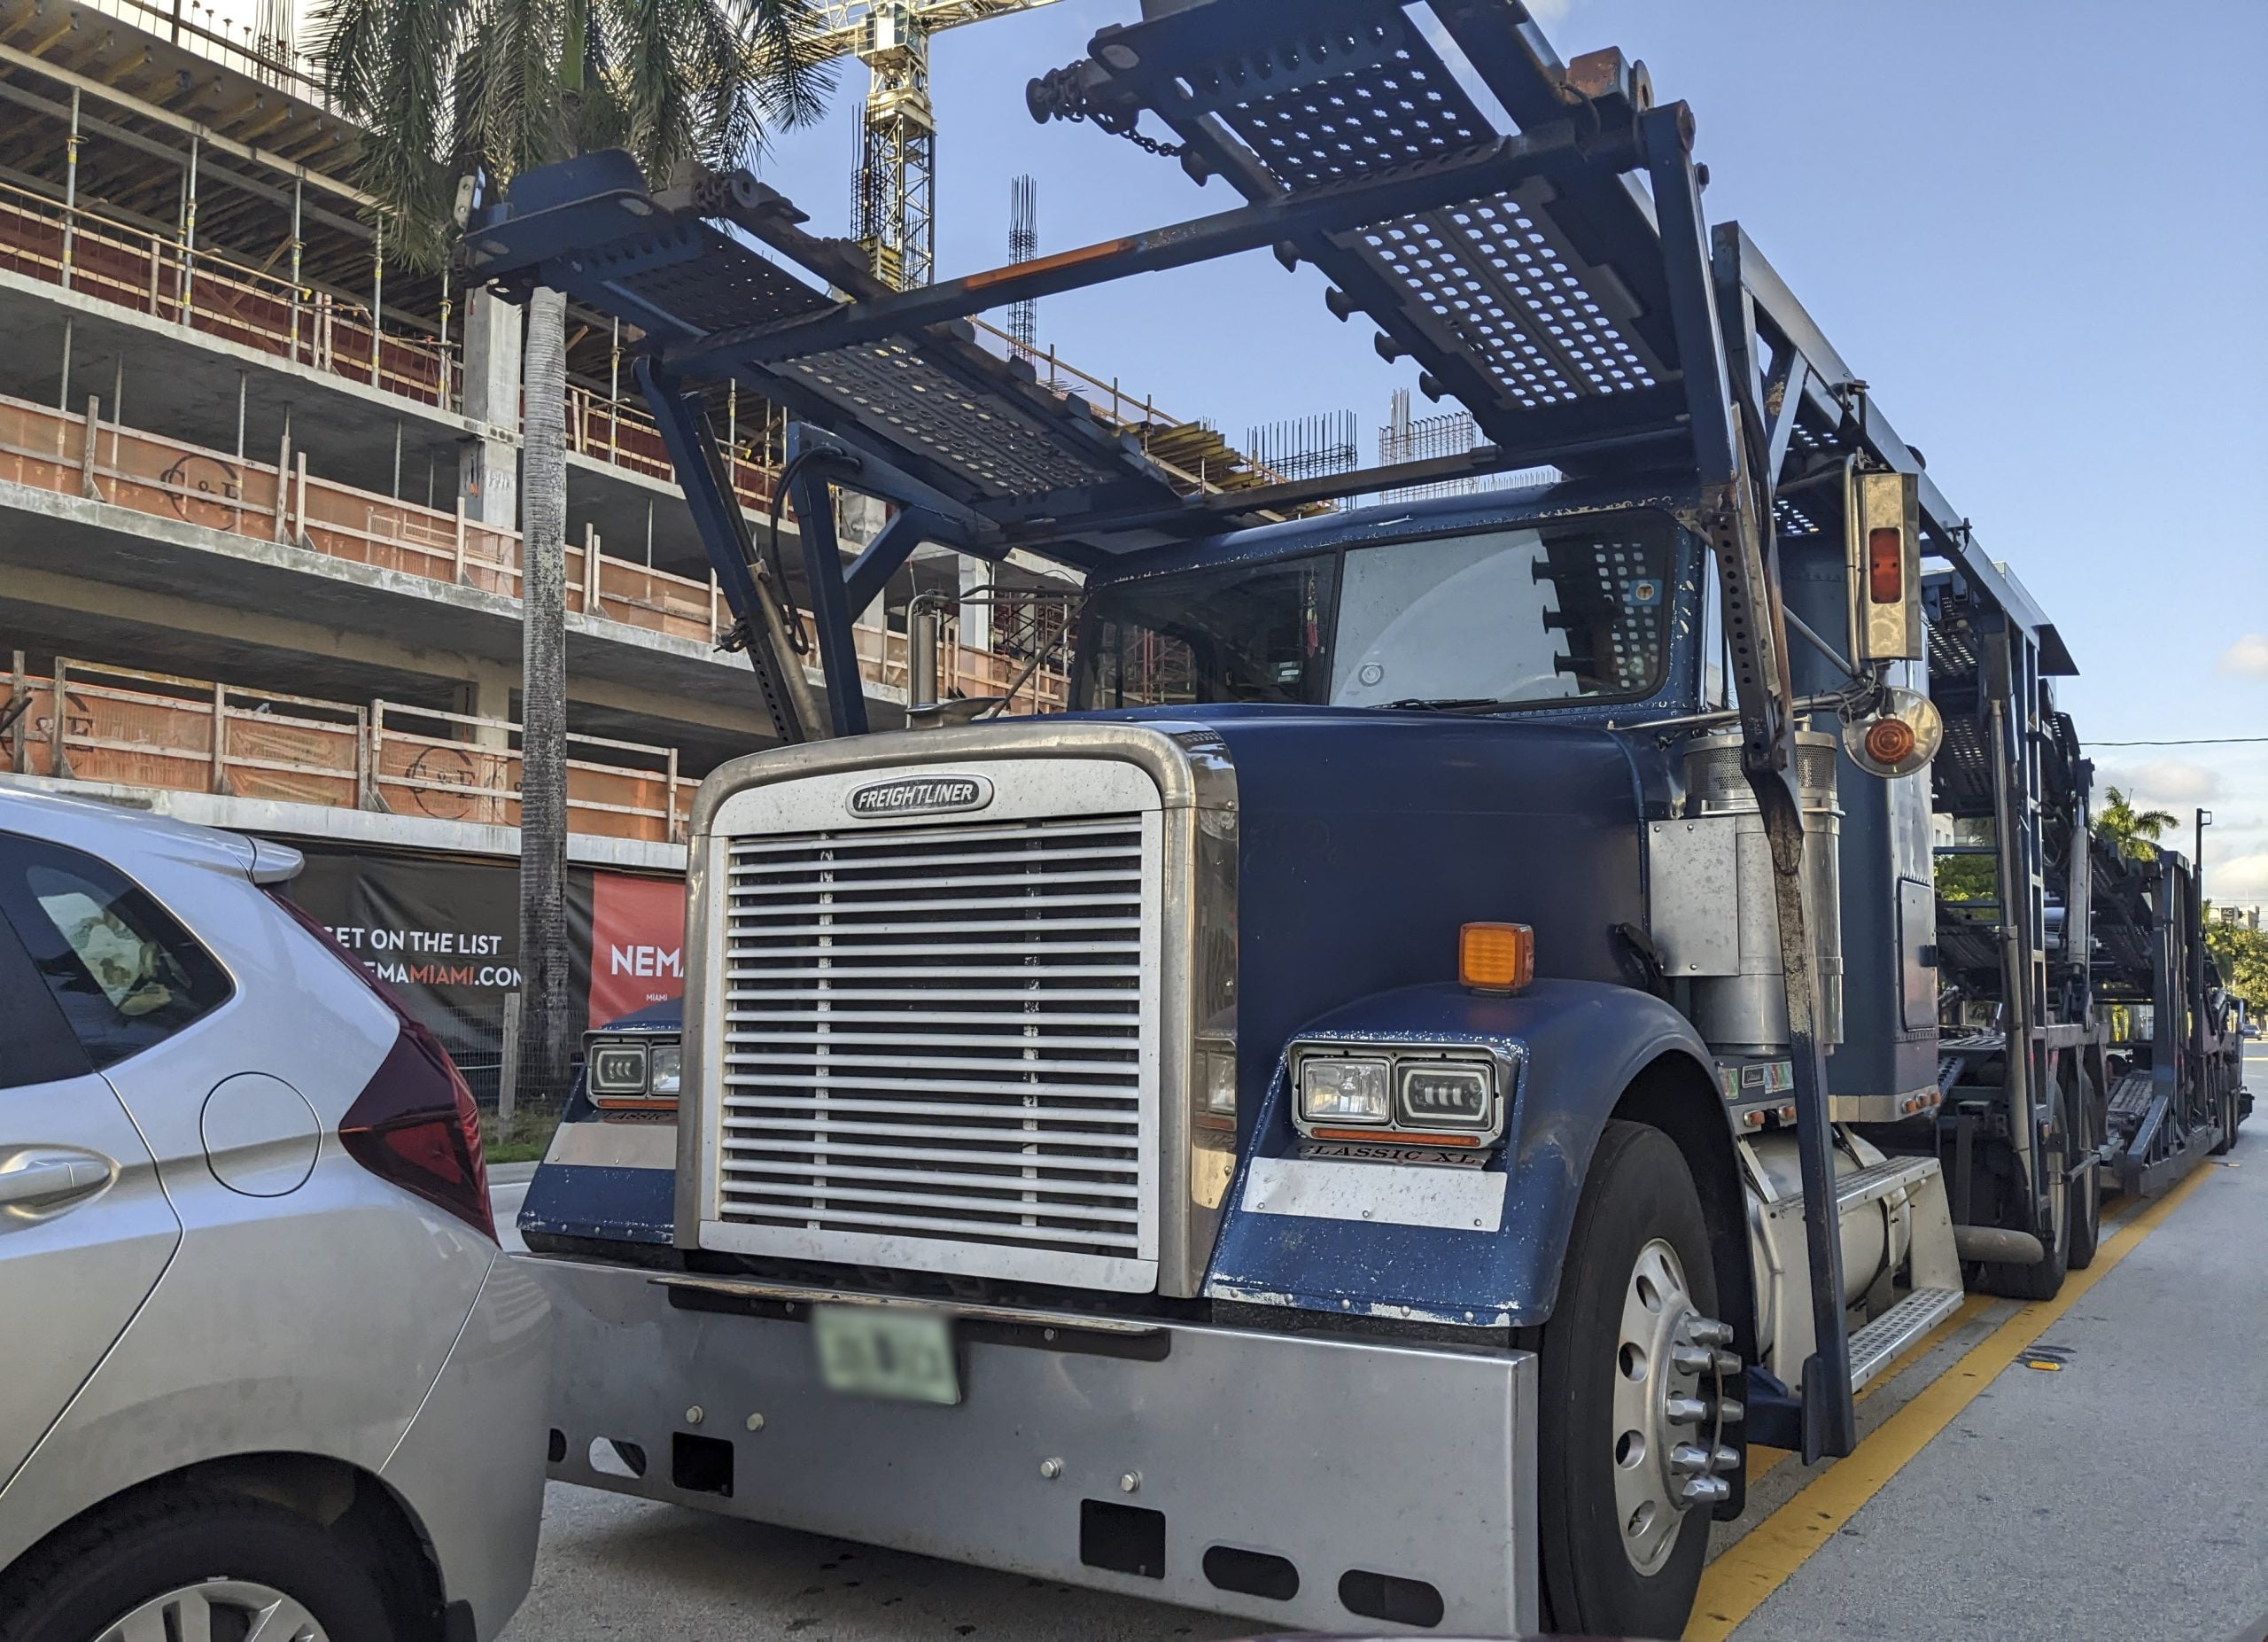 Key Factors to Consider When Choosing an Auto Transporter